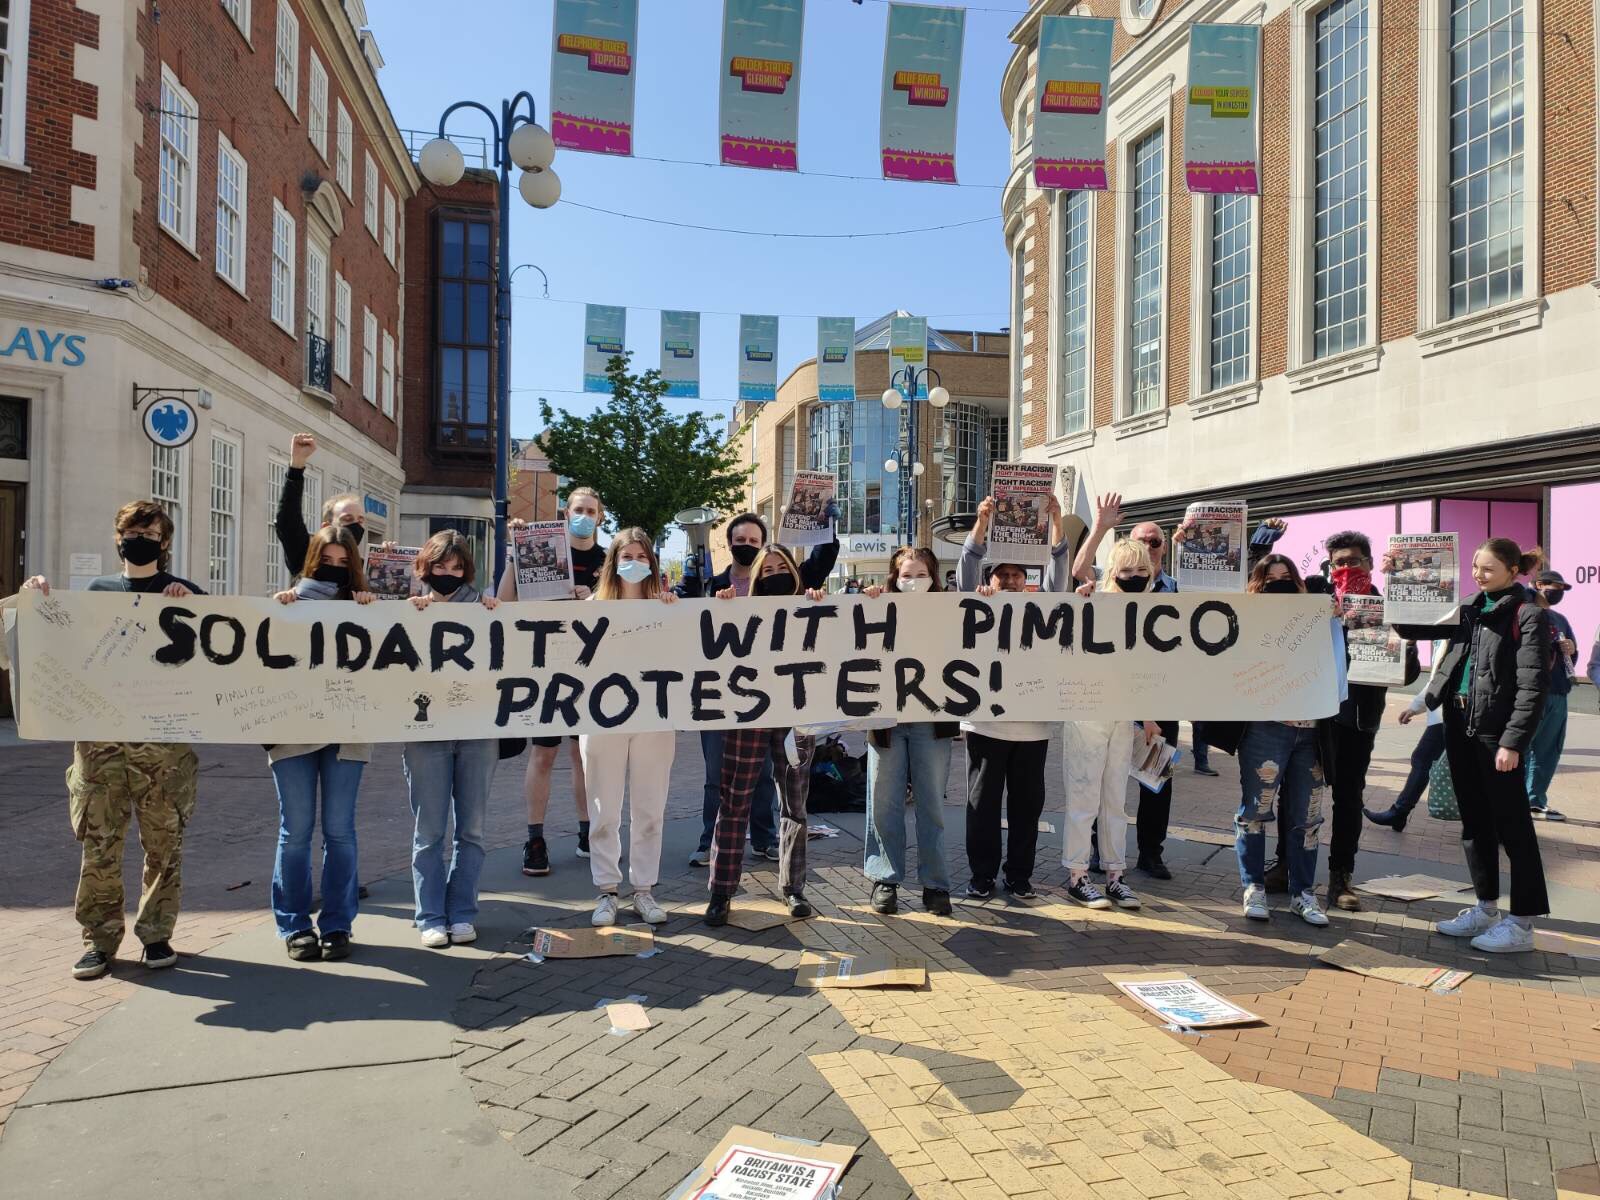 Students at Pimlico Academy are rising up because they know protests work